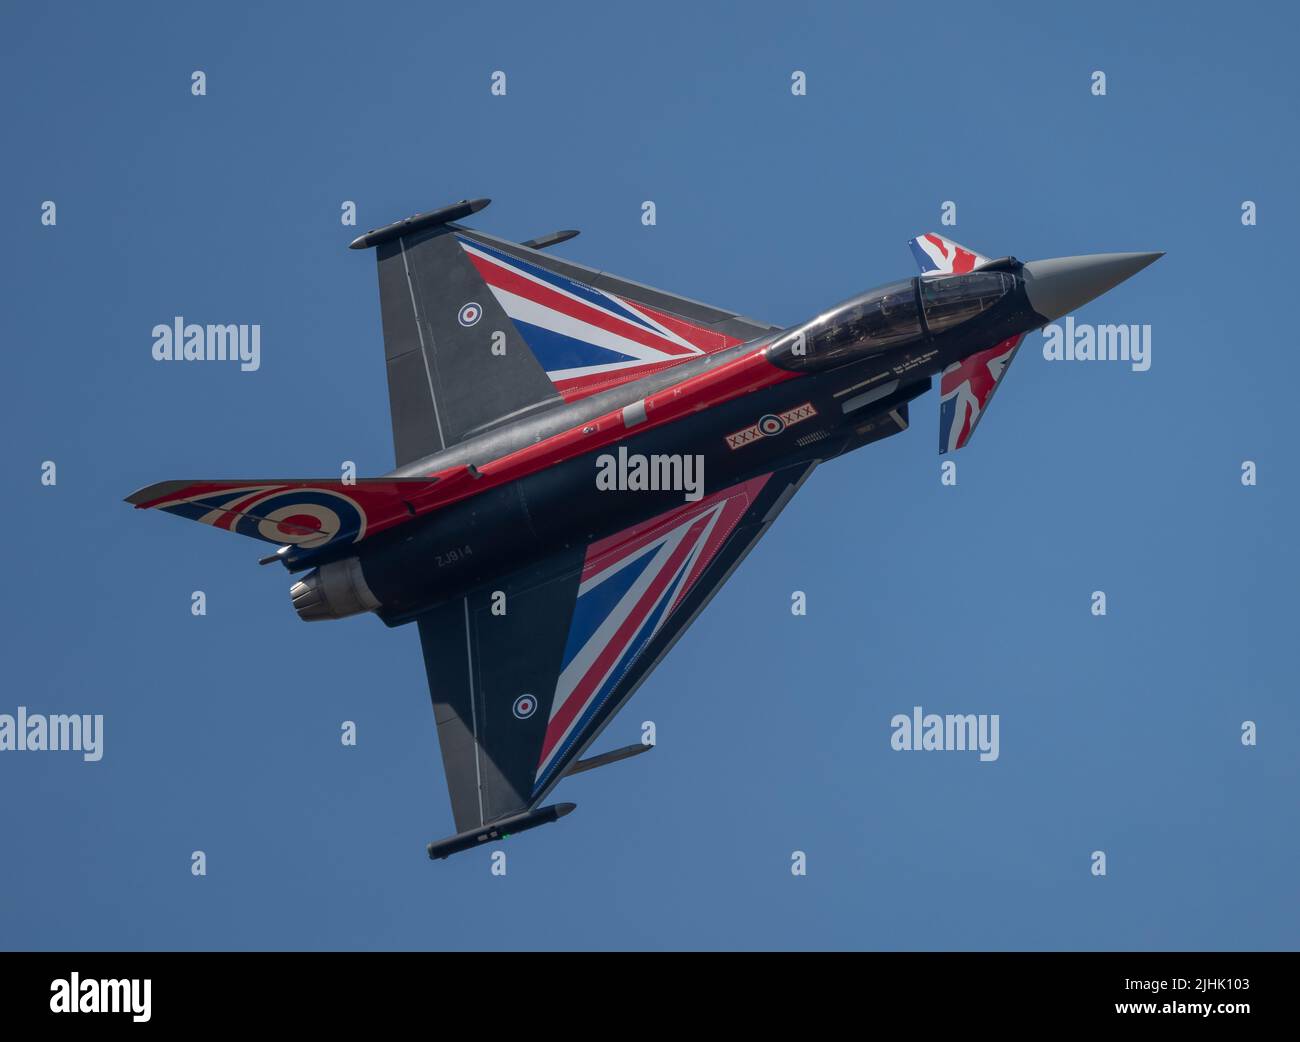 RAF Fairford, Gloucester, UK. 16 July 2022. Military aircraft of all shapes and sizes, from all eras and countries of the world, gather for one of the world’s largest airshows. Image: Eurofighter Typhoon of the RAF Display Team, No 29 Squadron sporting the British flag livery Stock Photo